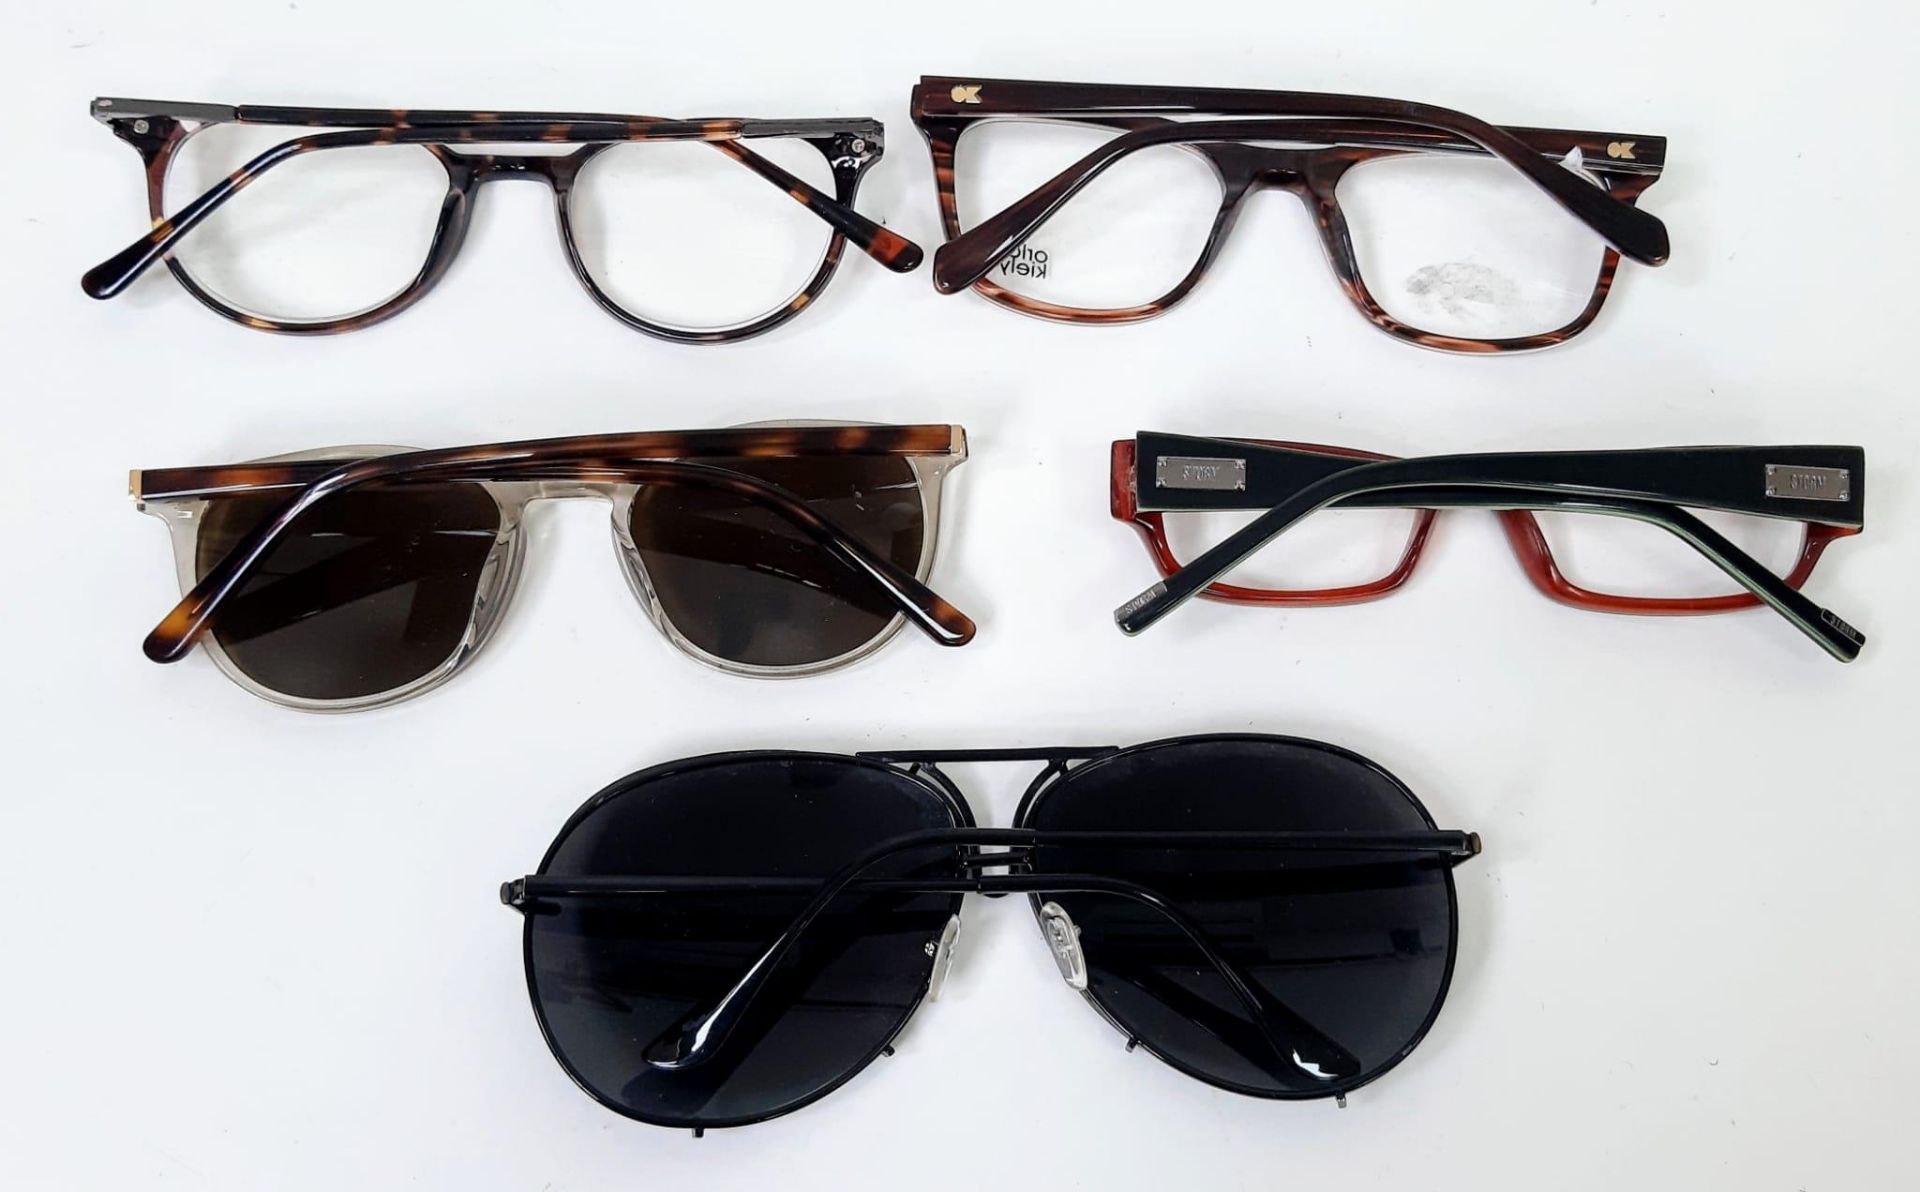 Five Pairs of Branded Glasses/Sunglasses - Image 6 of 6